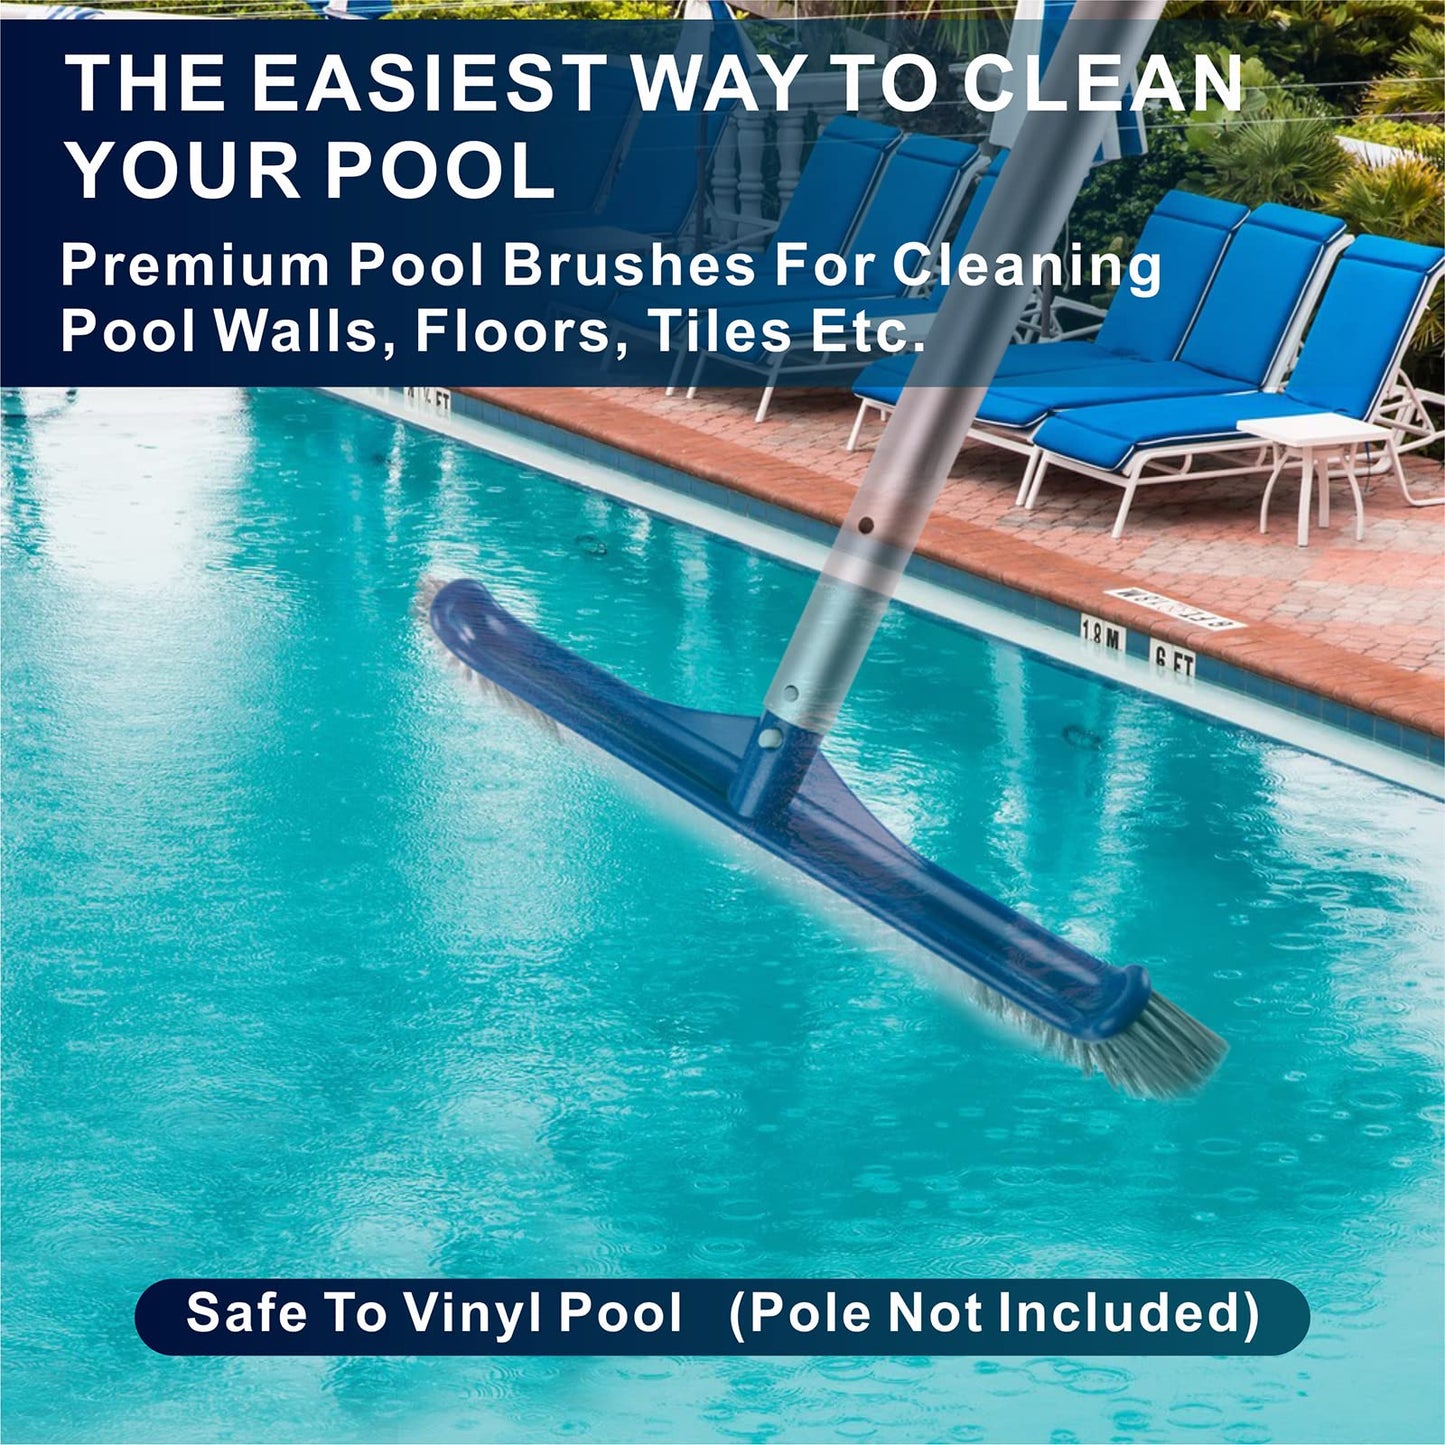 POOLAZA Pool Brush, 17.5" Pool Brushes for Cleaning Pool Walls, Premium Nylon Bristles Pool Brush Head with EZ Clip, Curved Ends High-Efficiency Pool Scrub Brush